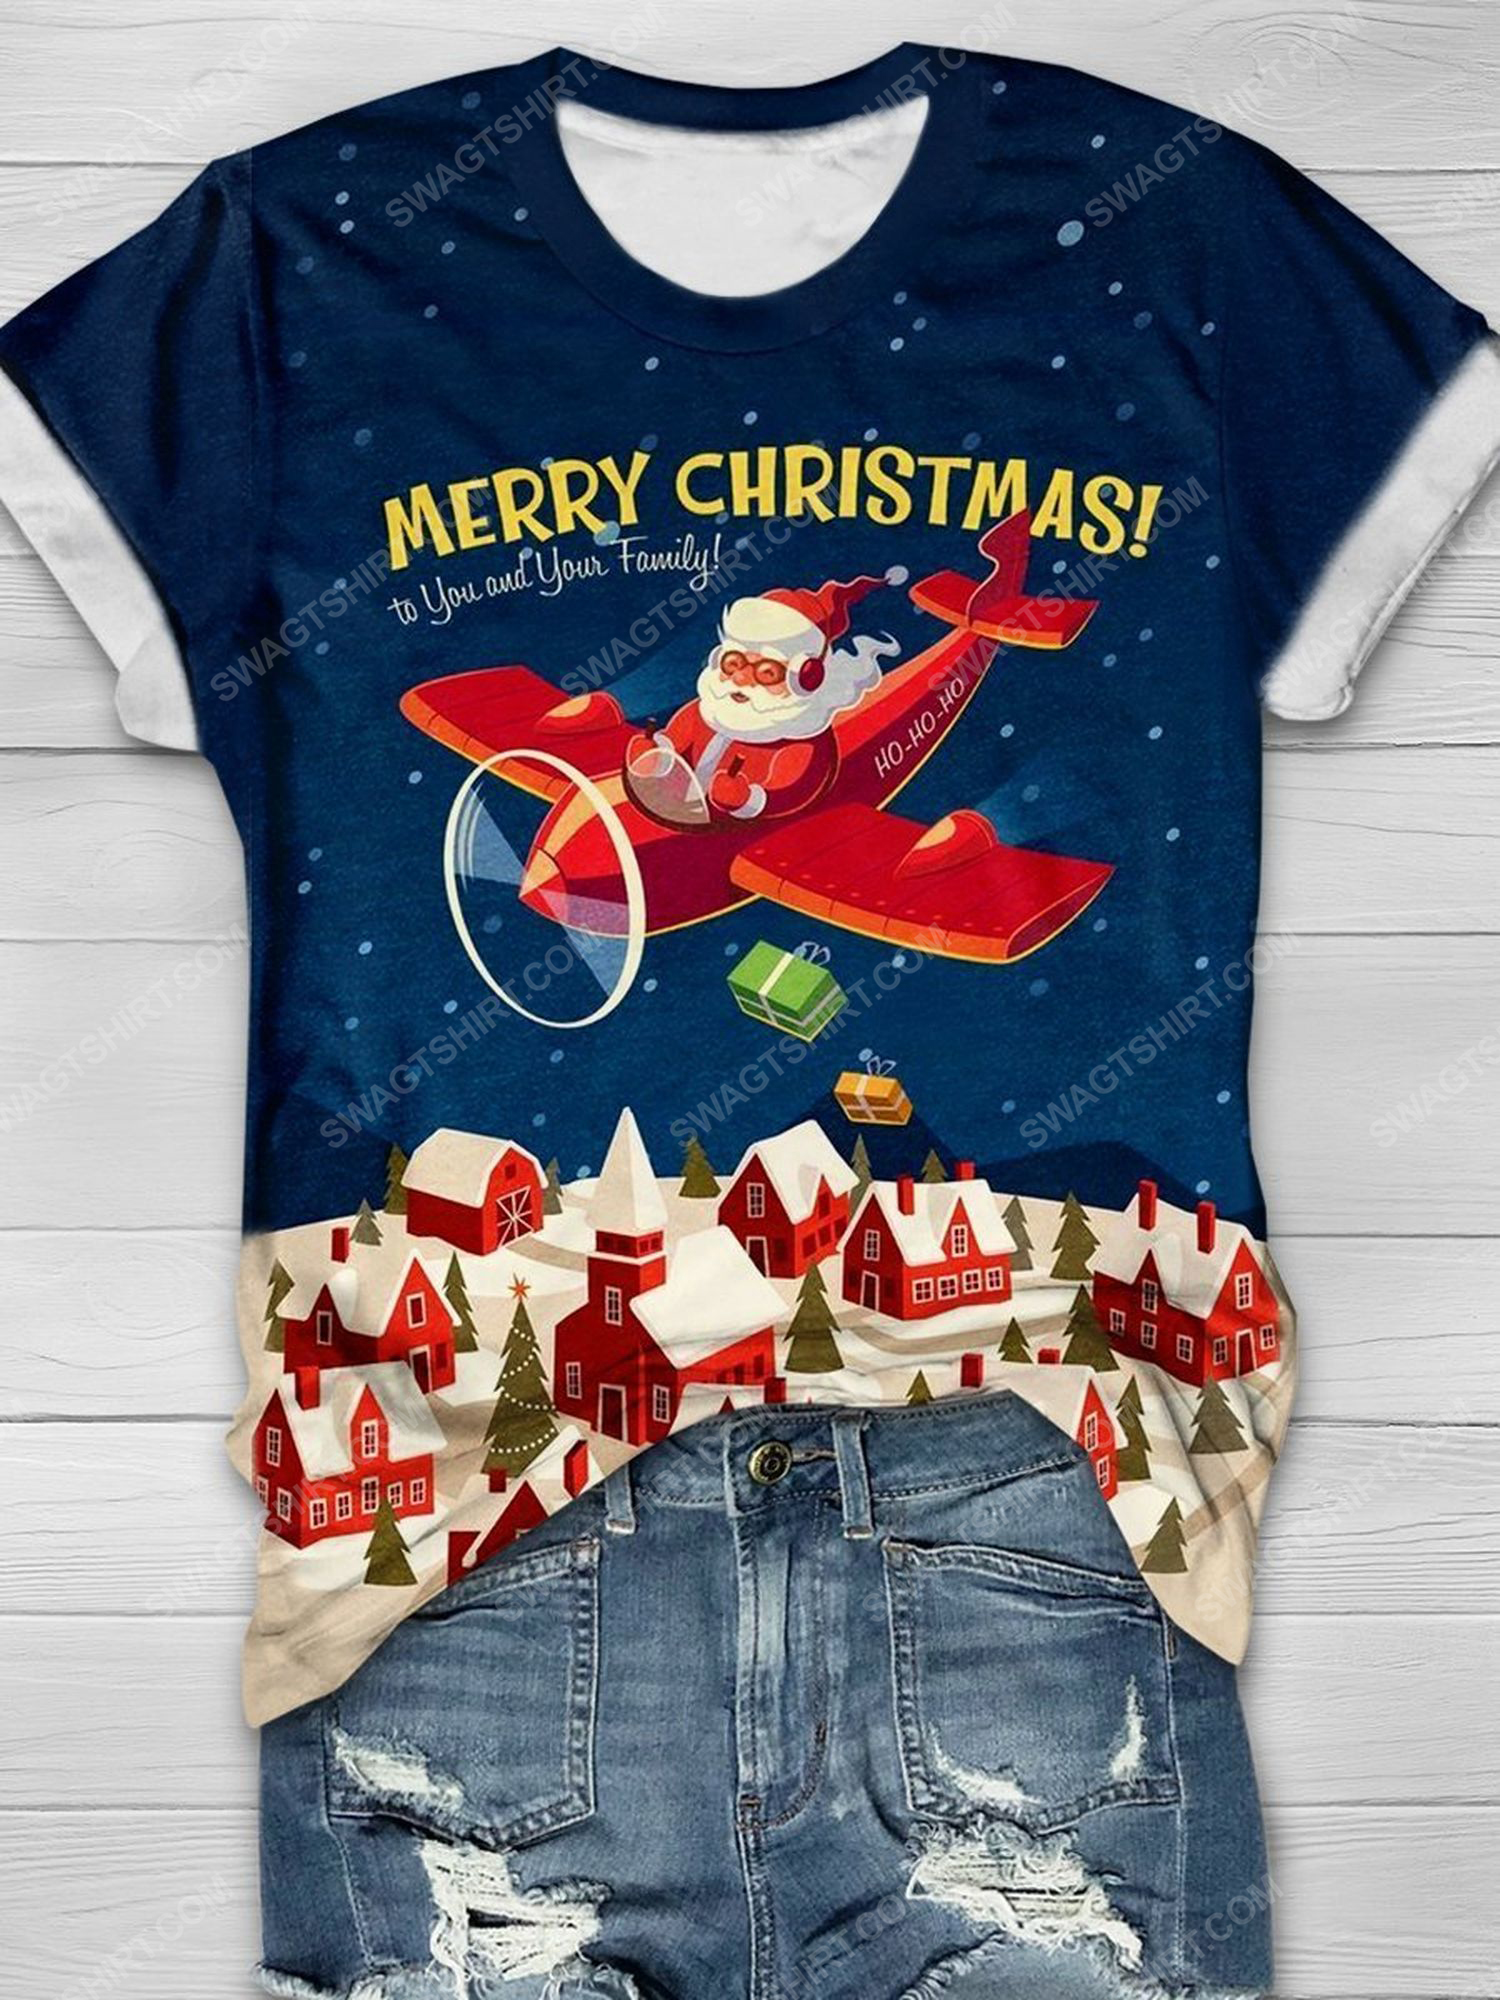 Merry christmas to you and your family santa claus shirt